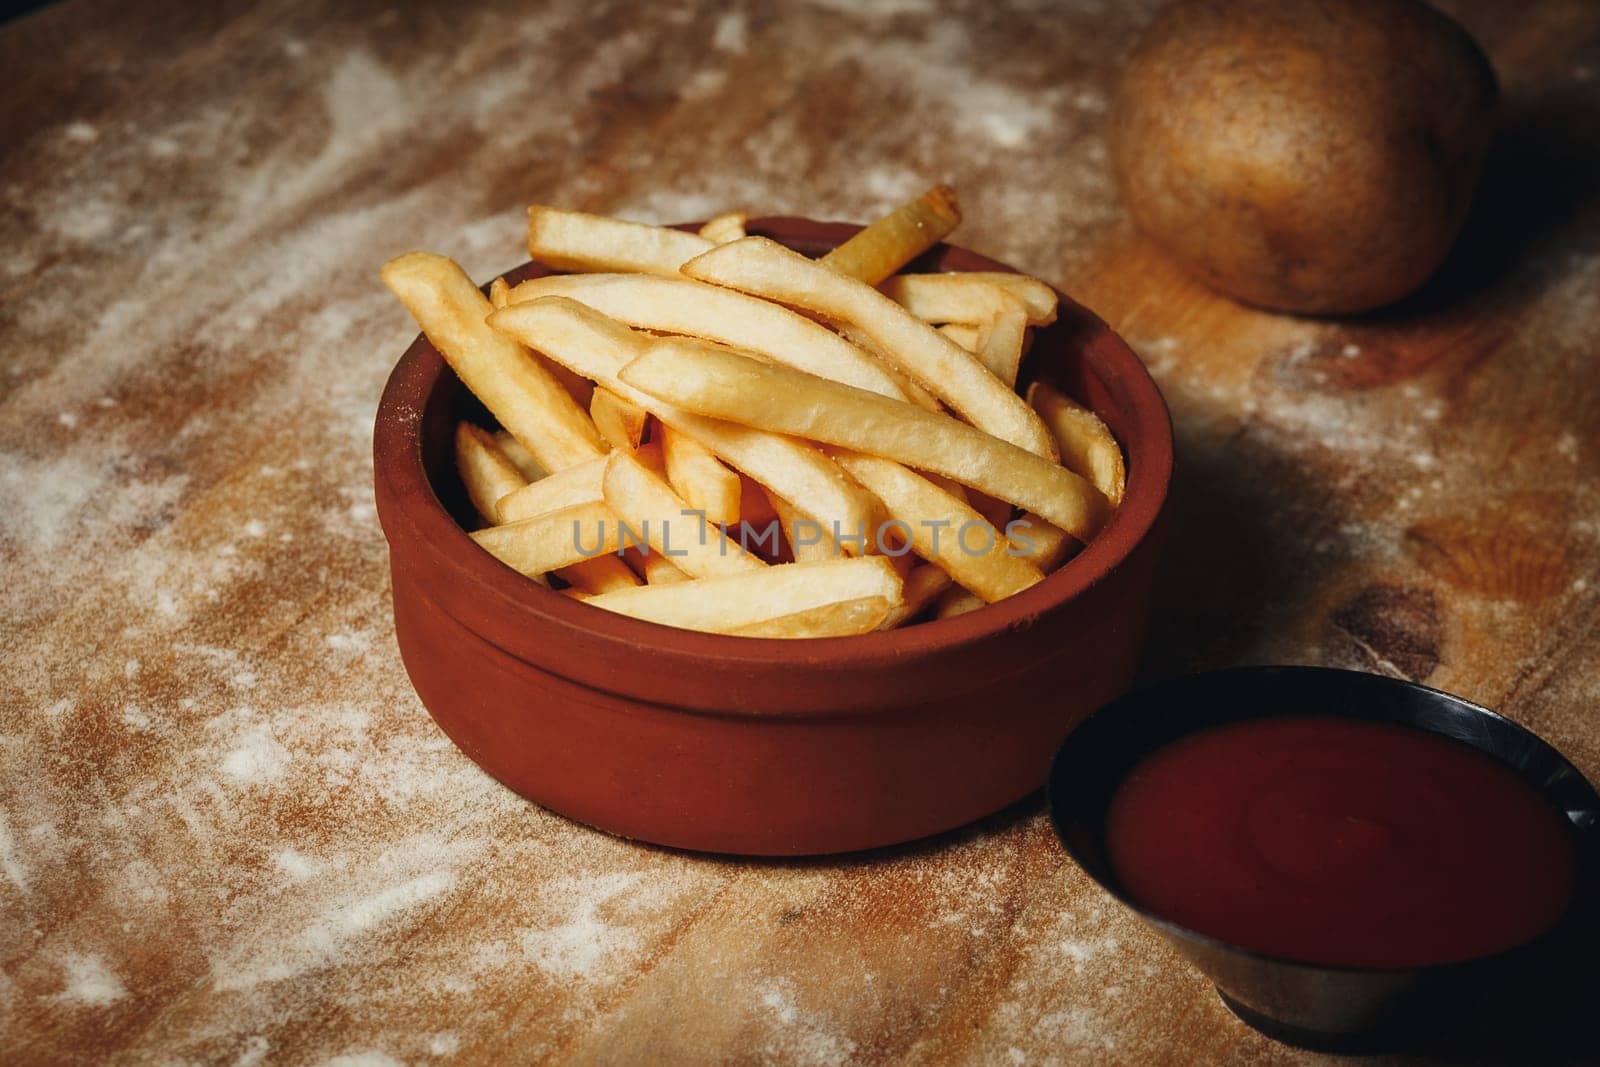 Golden French Fries in A close-up view of crispy french fries served in a bowl with a side of ketchup, ready for snacking.a Ceramic Bowl With Ketchup on a Textured Table. High quality photo